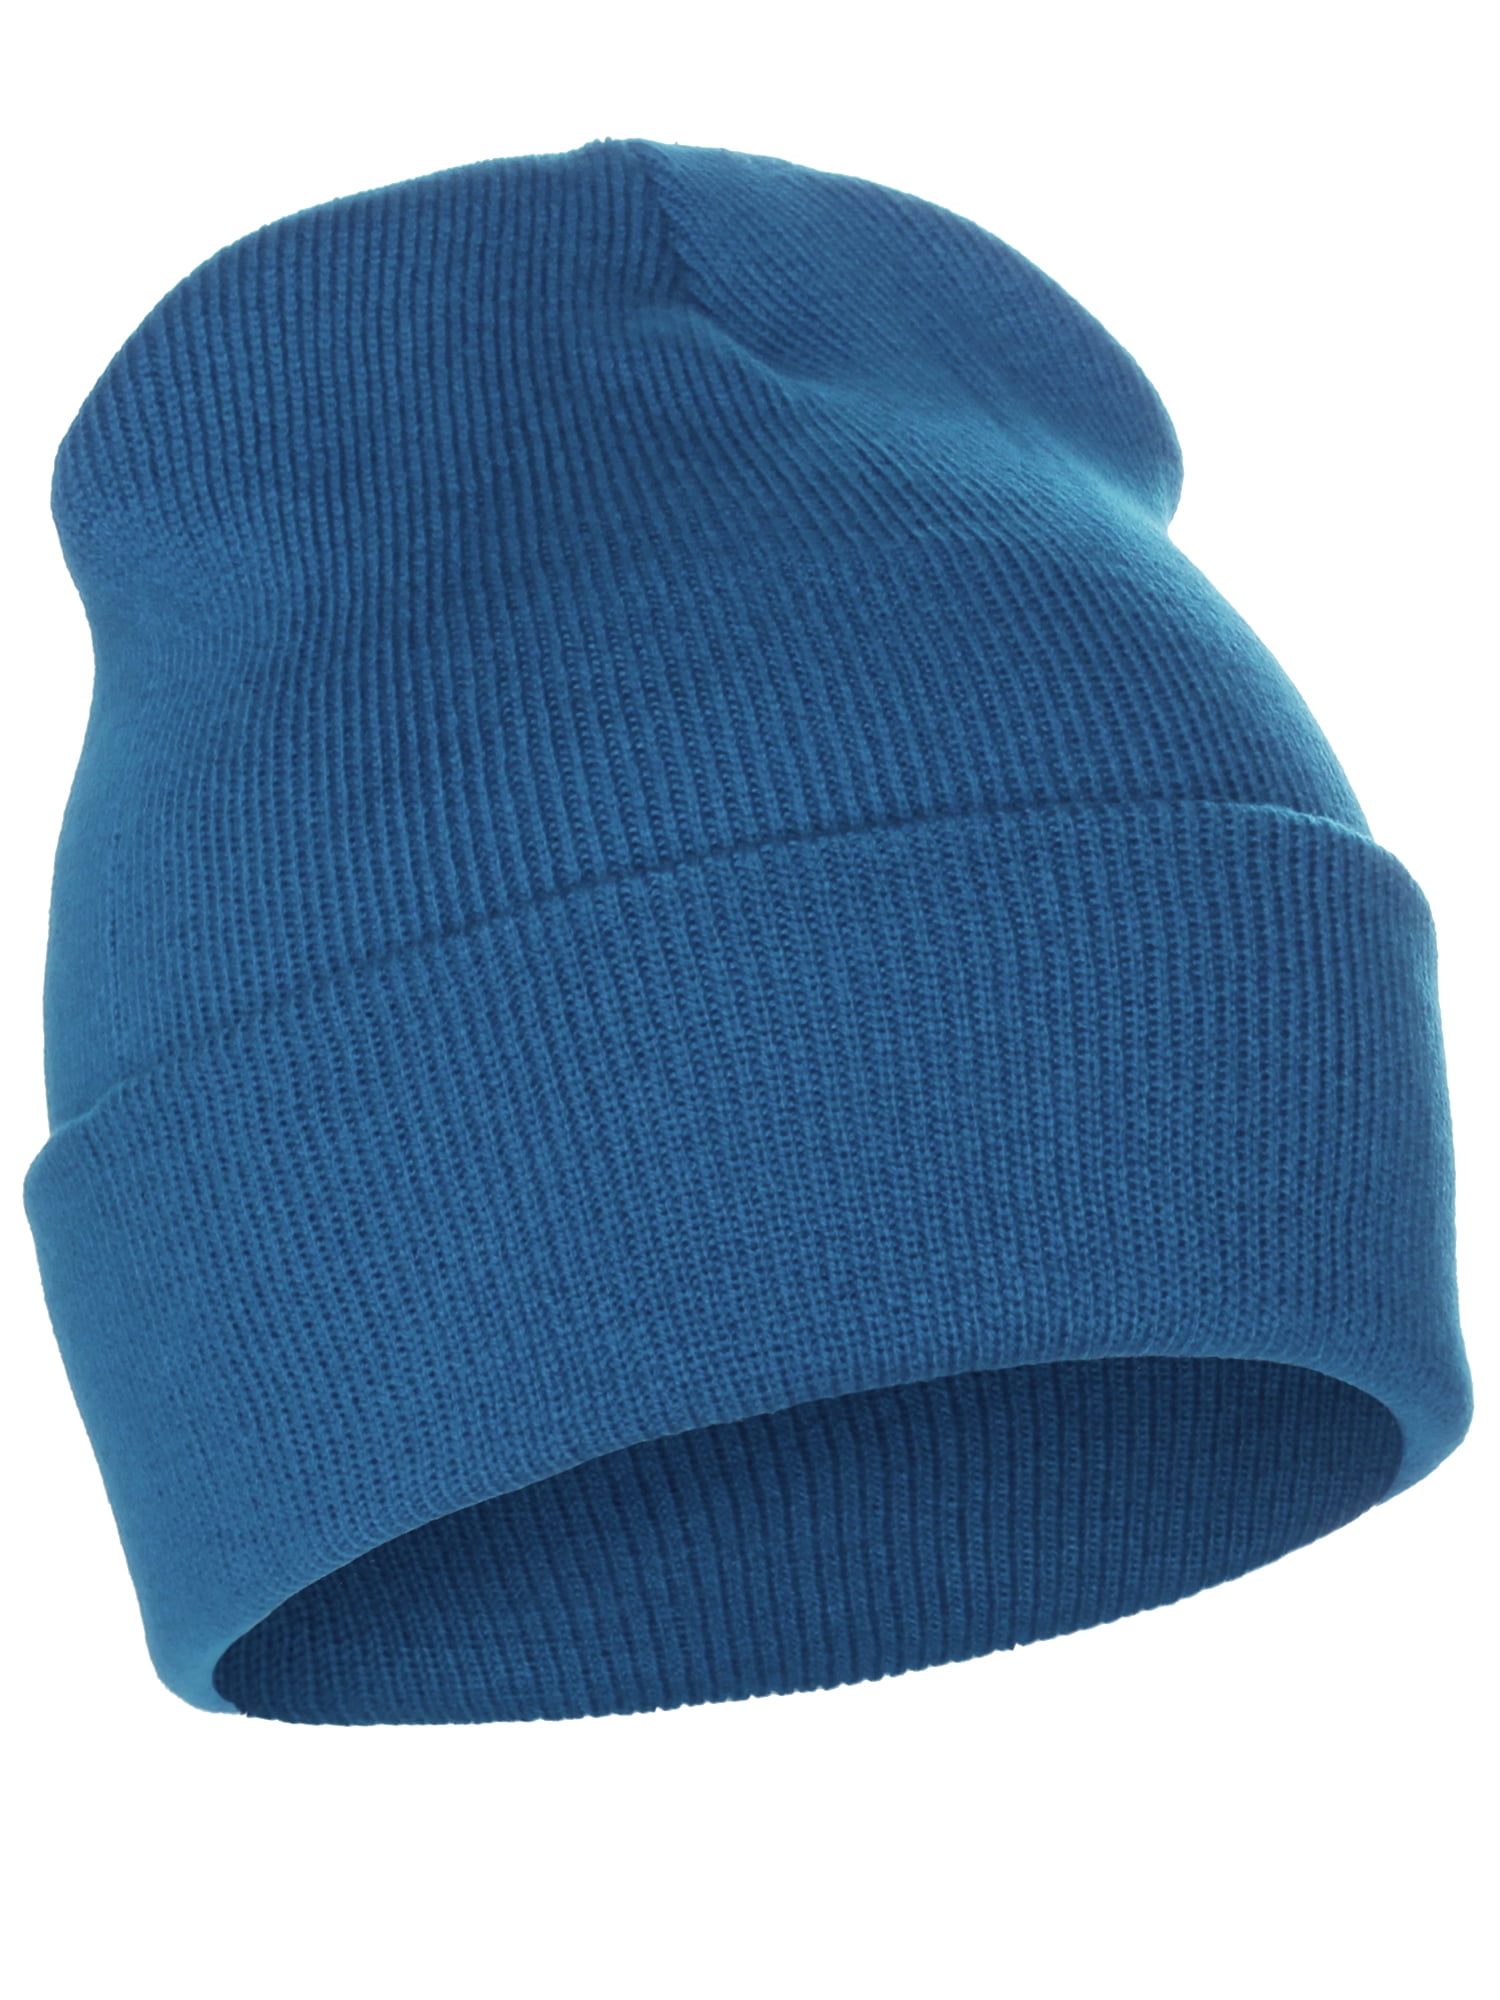 Cuffed Plain Skully Winter Turquoise Classic Knit Beanie Cap, Hat